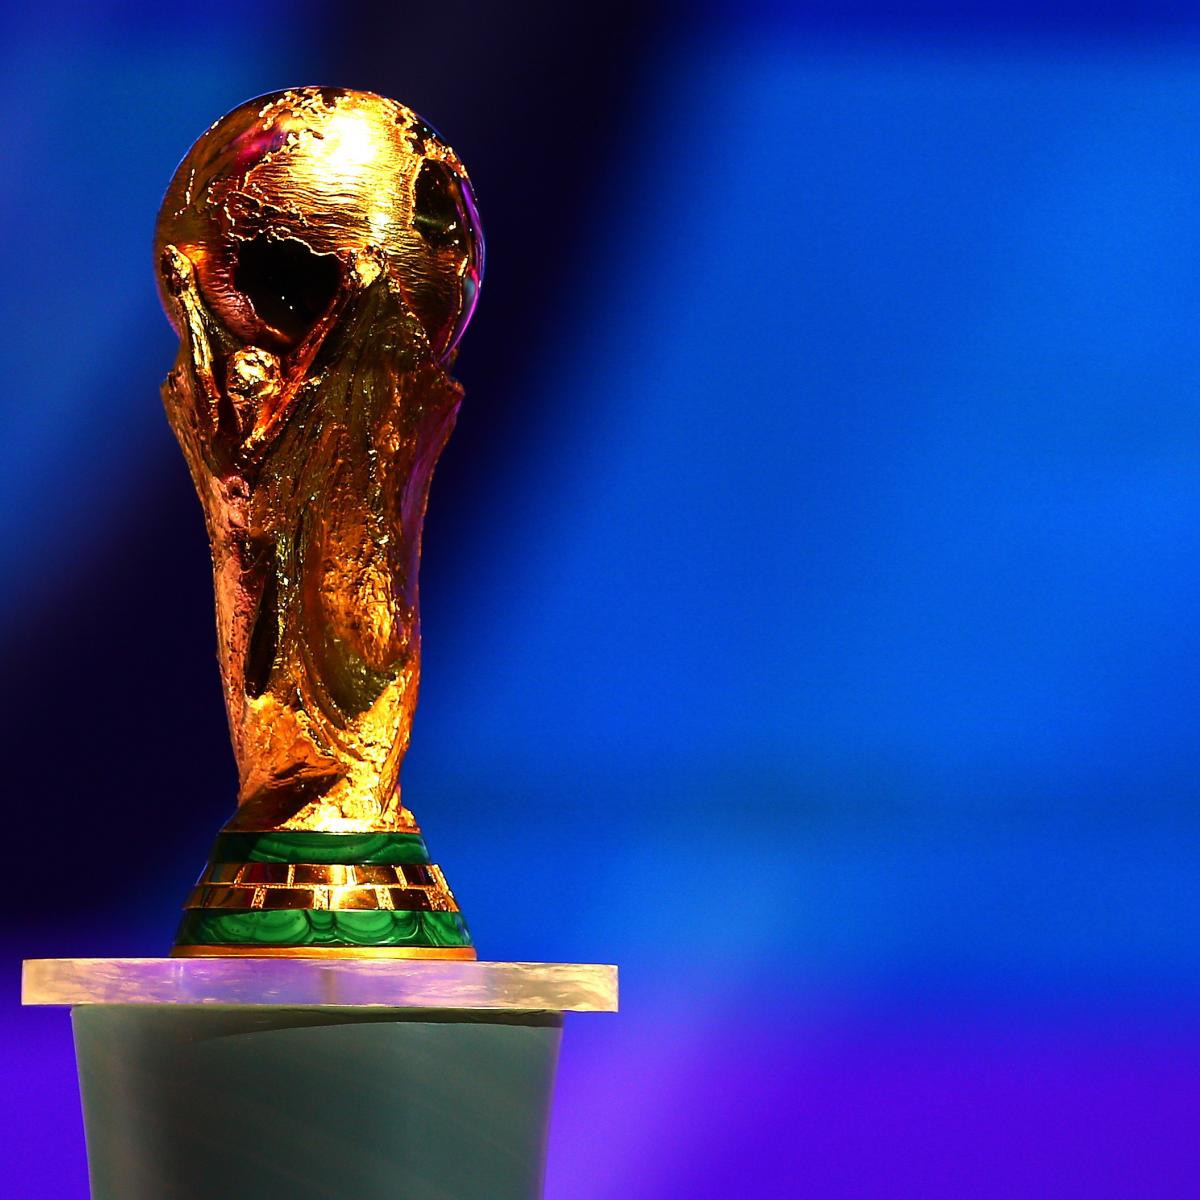 6 Reasons Why the World Cup Should Be Taken Away from Qatar